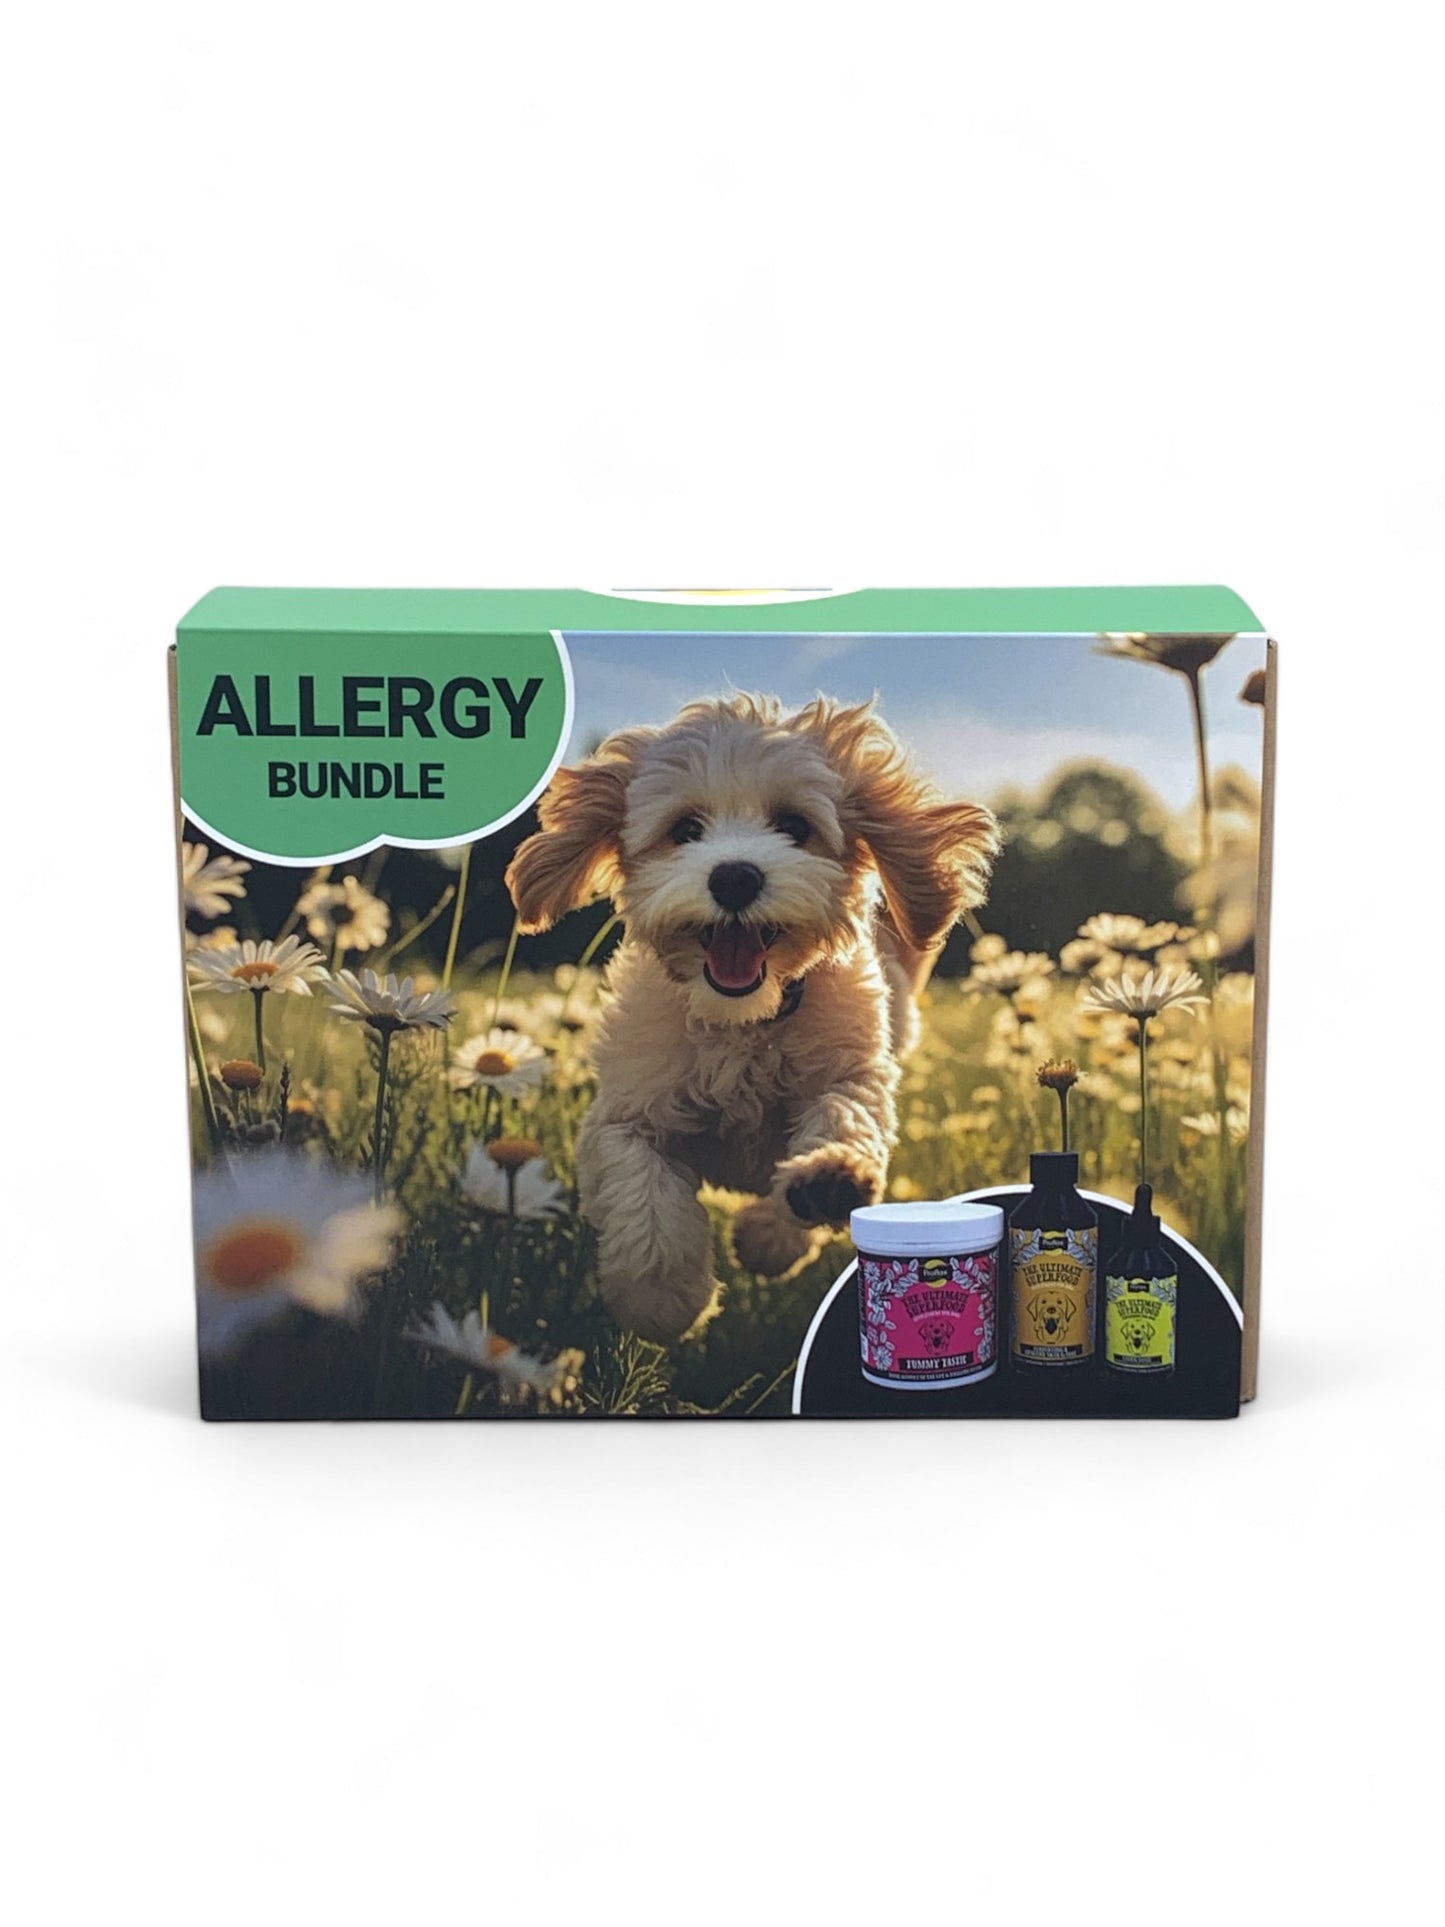 Proflax Allergy Bundle for Dogs